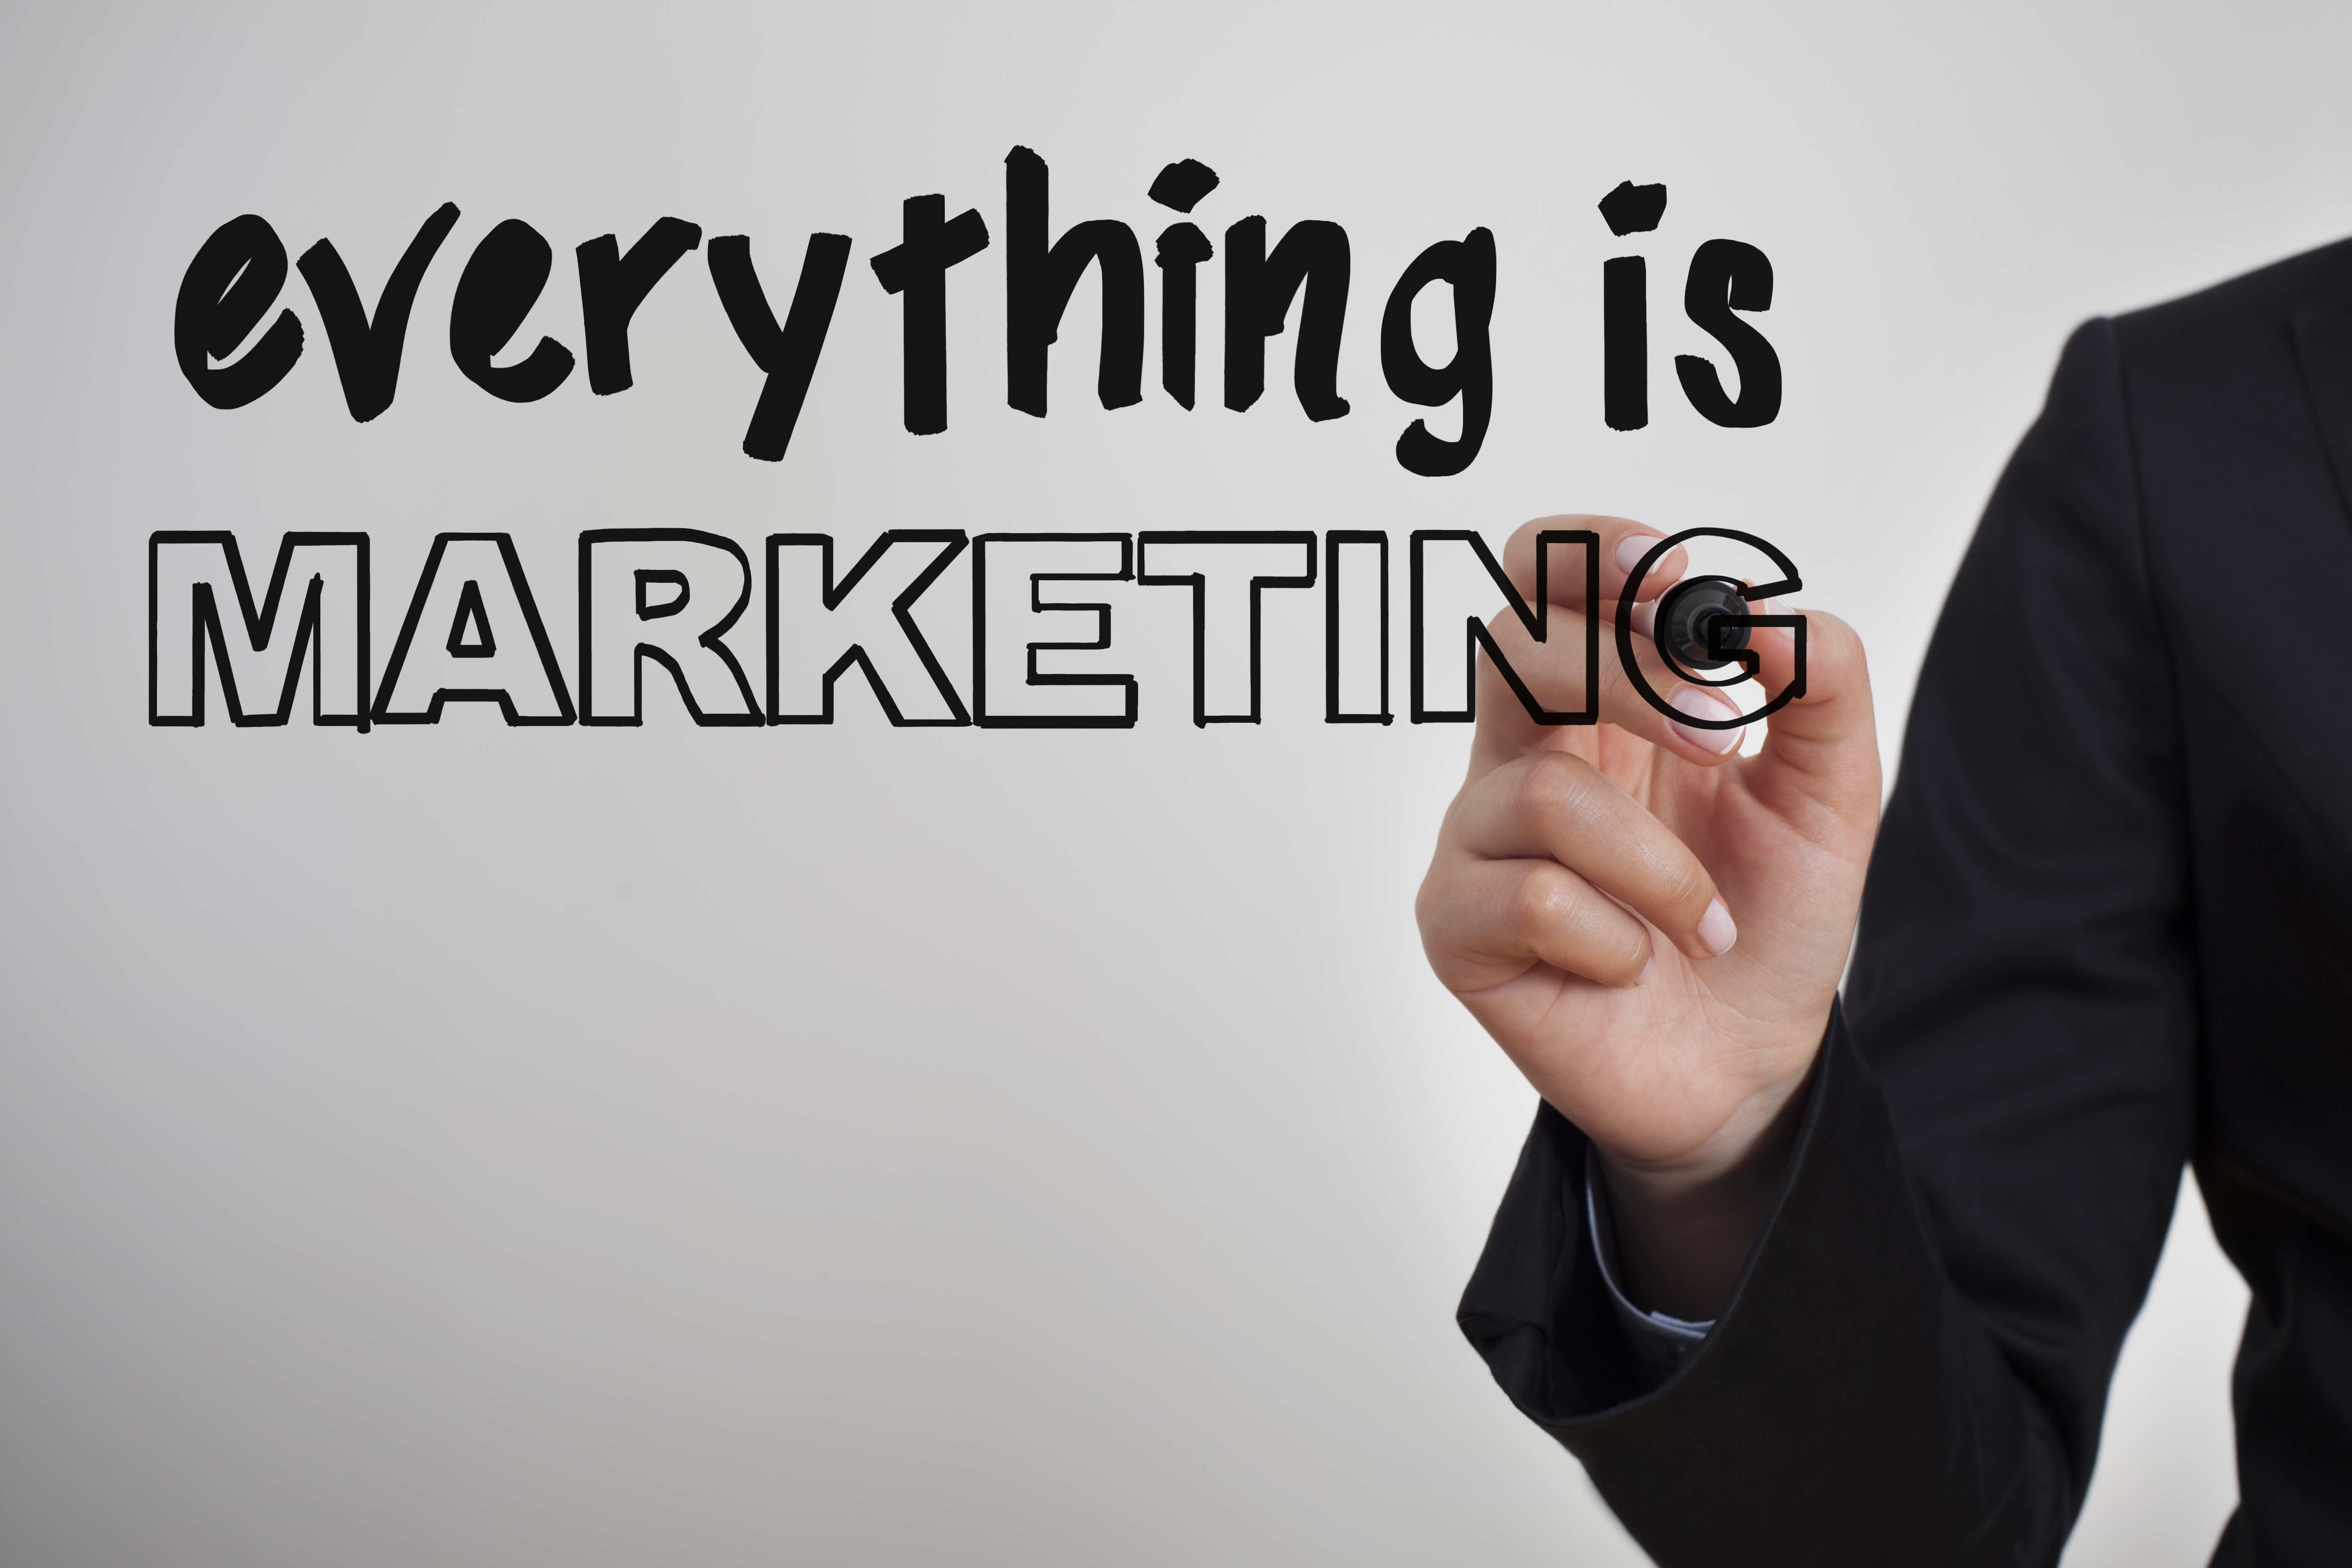 How to think about marketing